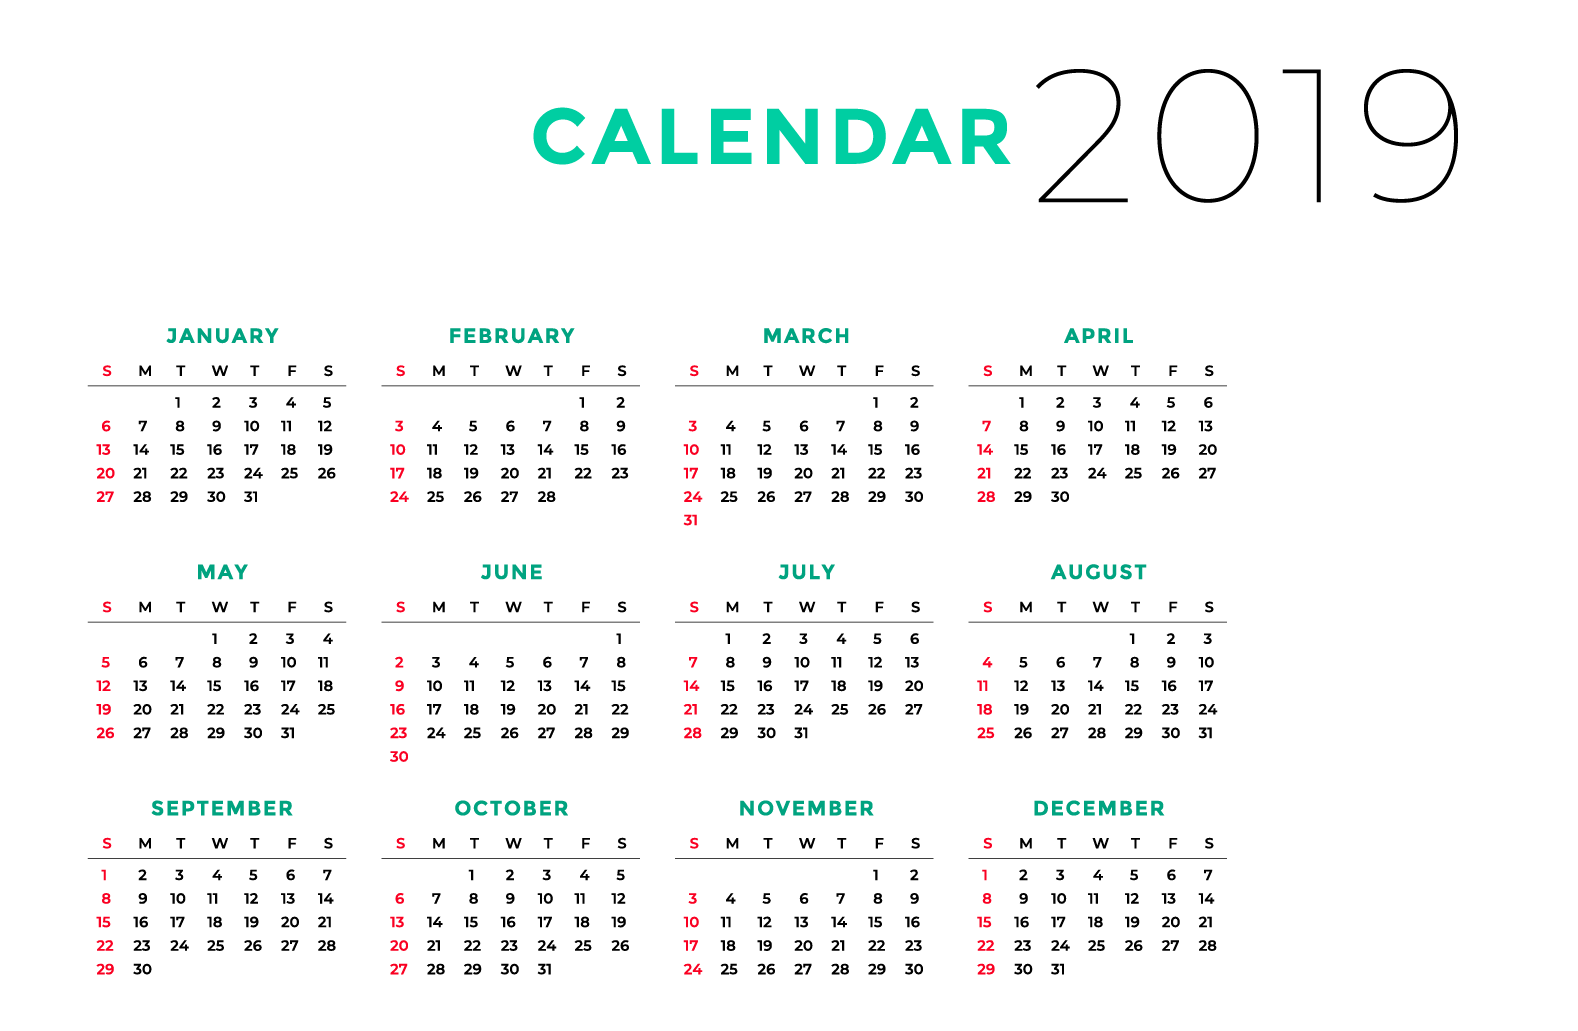 Calendar 2019 PNG Free Commercial Use Image